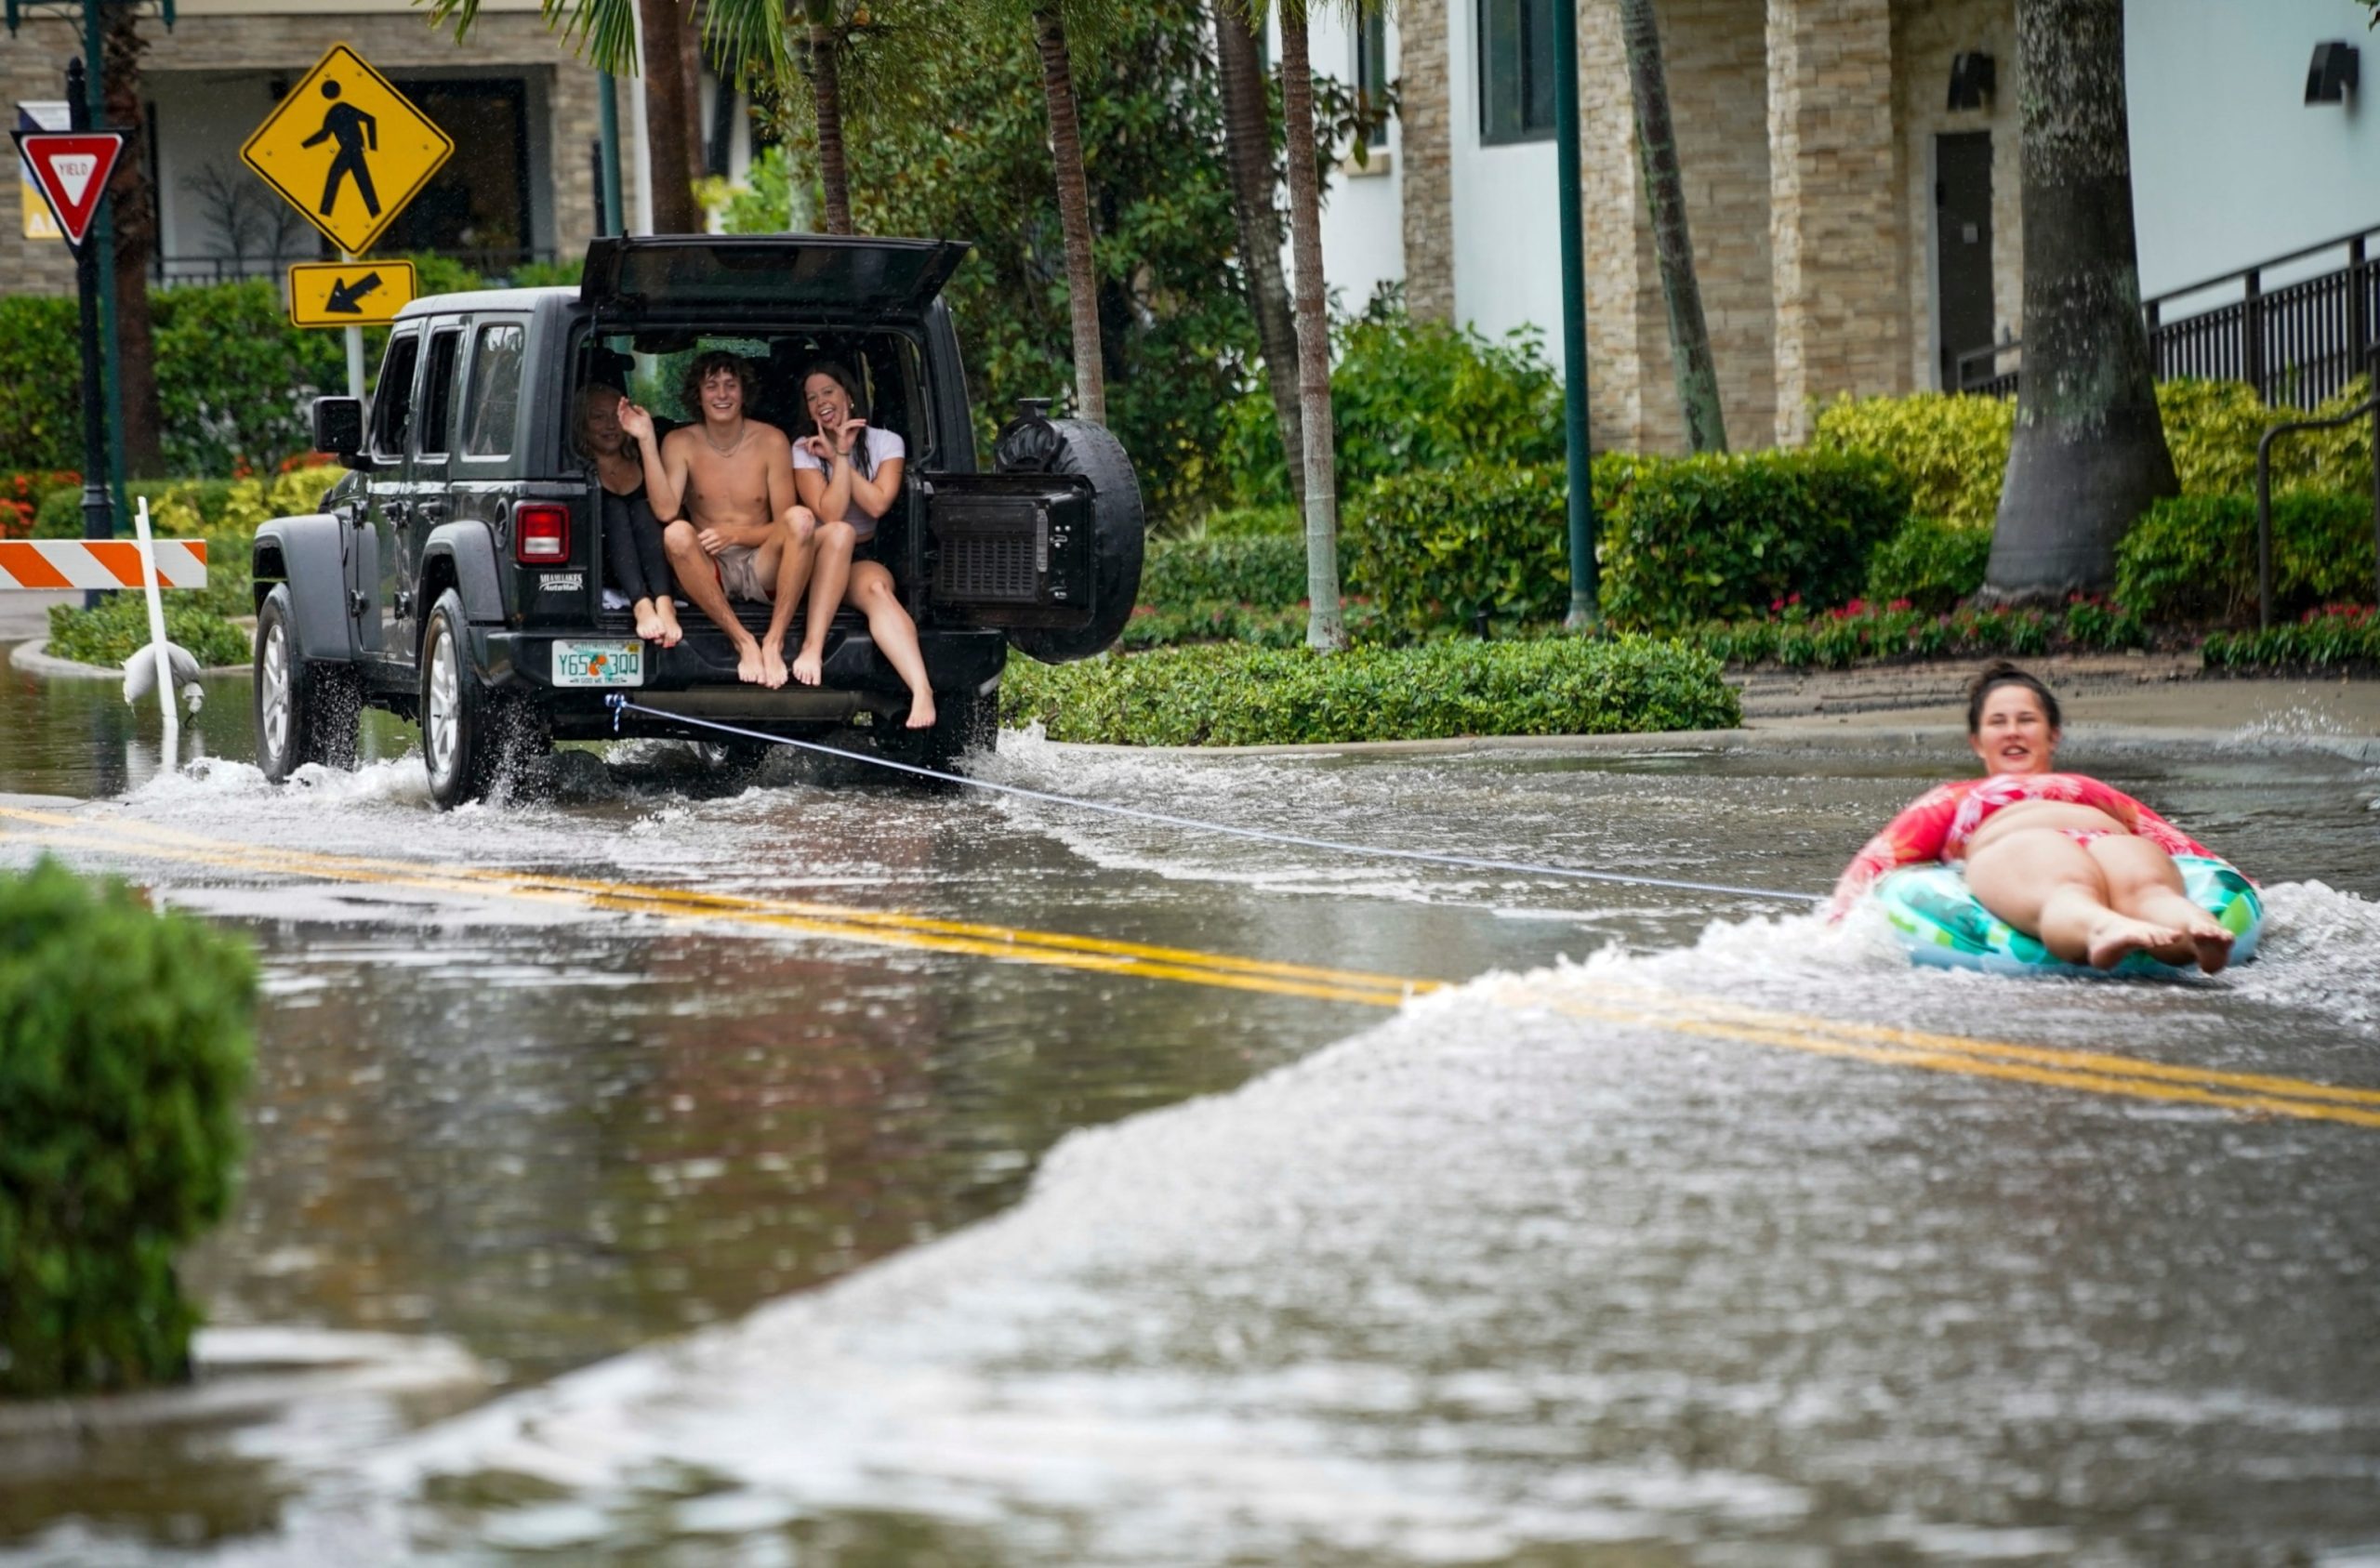 South Florida Braces for Continued Flooding Following Record Rainfall of Over 2 Feet